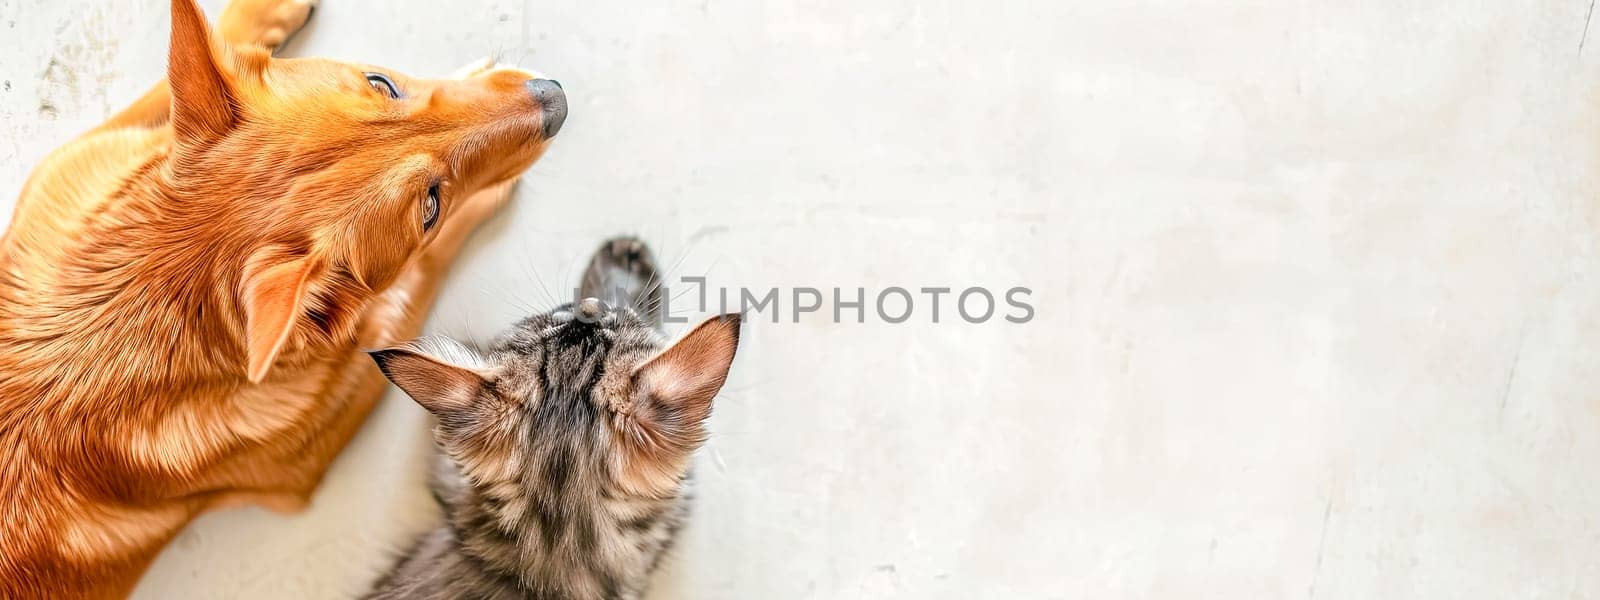 A heartwarming overhead view of a golden dog and a grey tabby cat lying together on a textured white surface, symbolizing friendship between different species by Edophoto